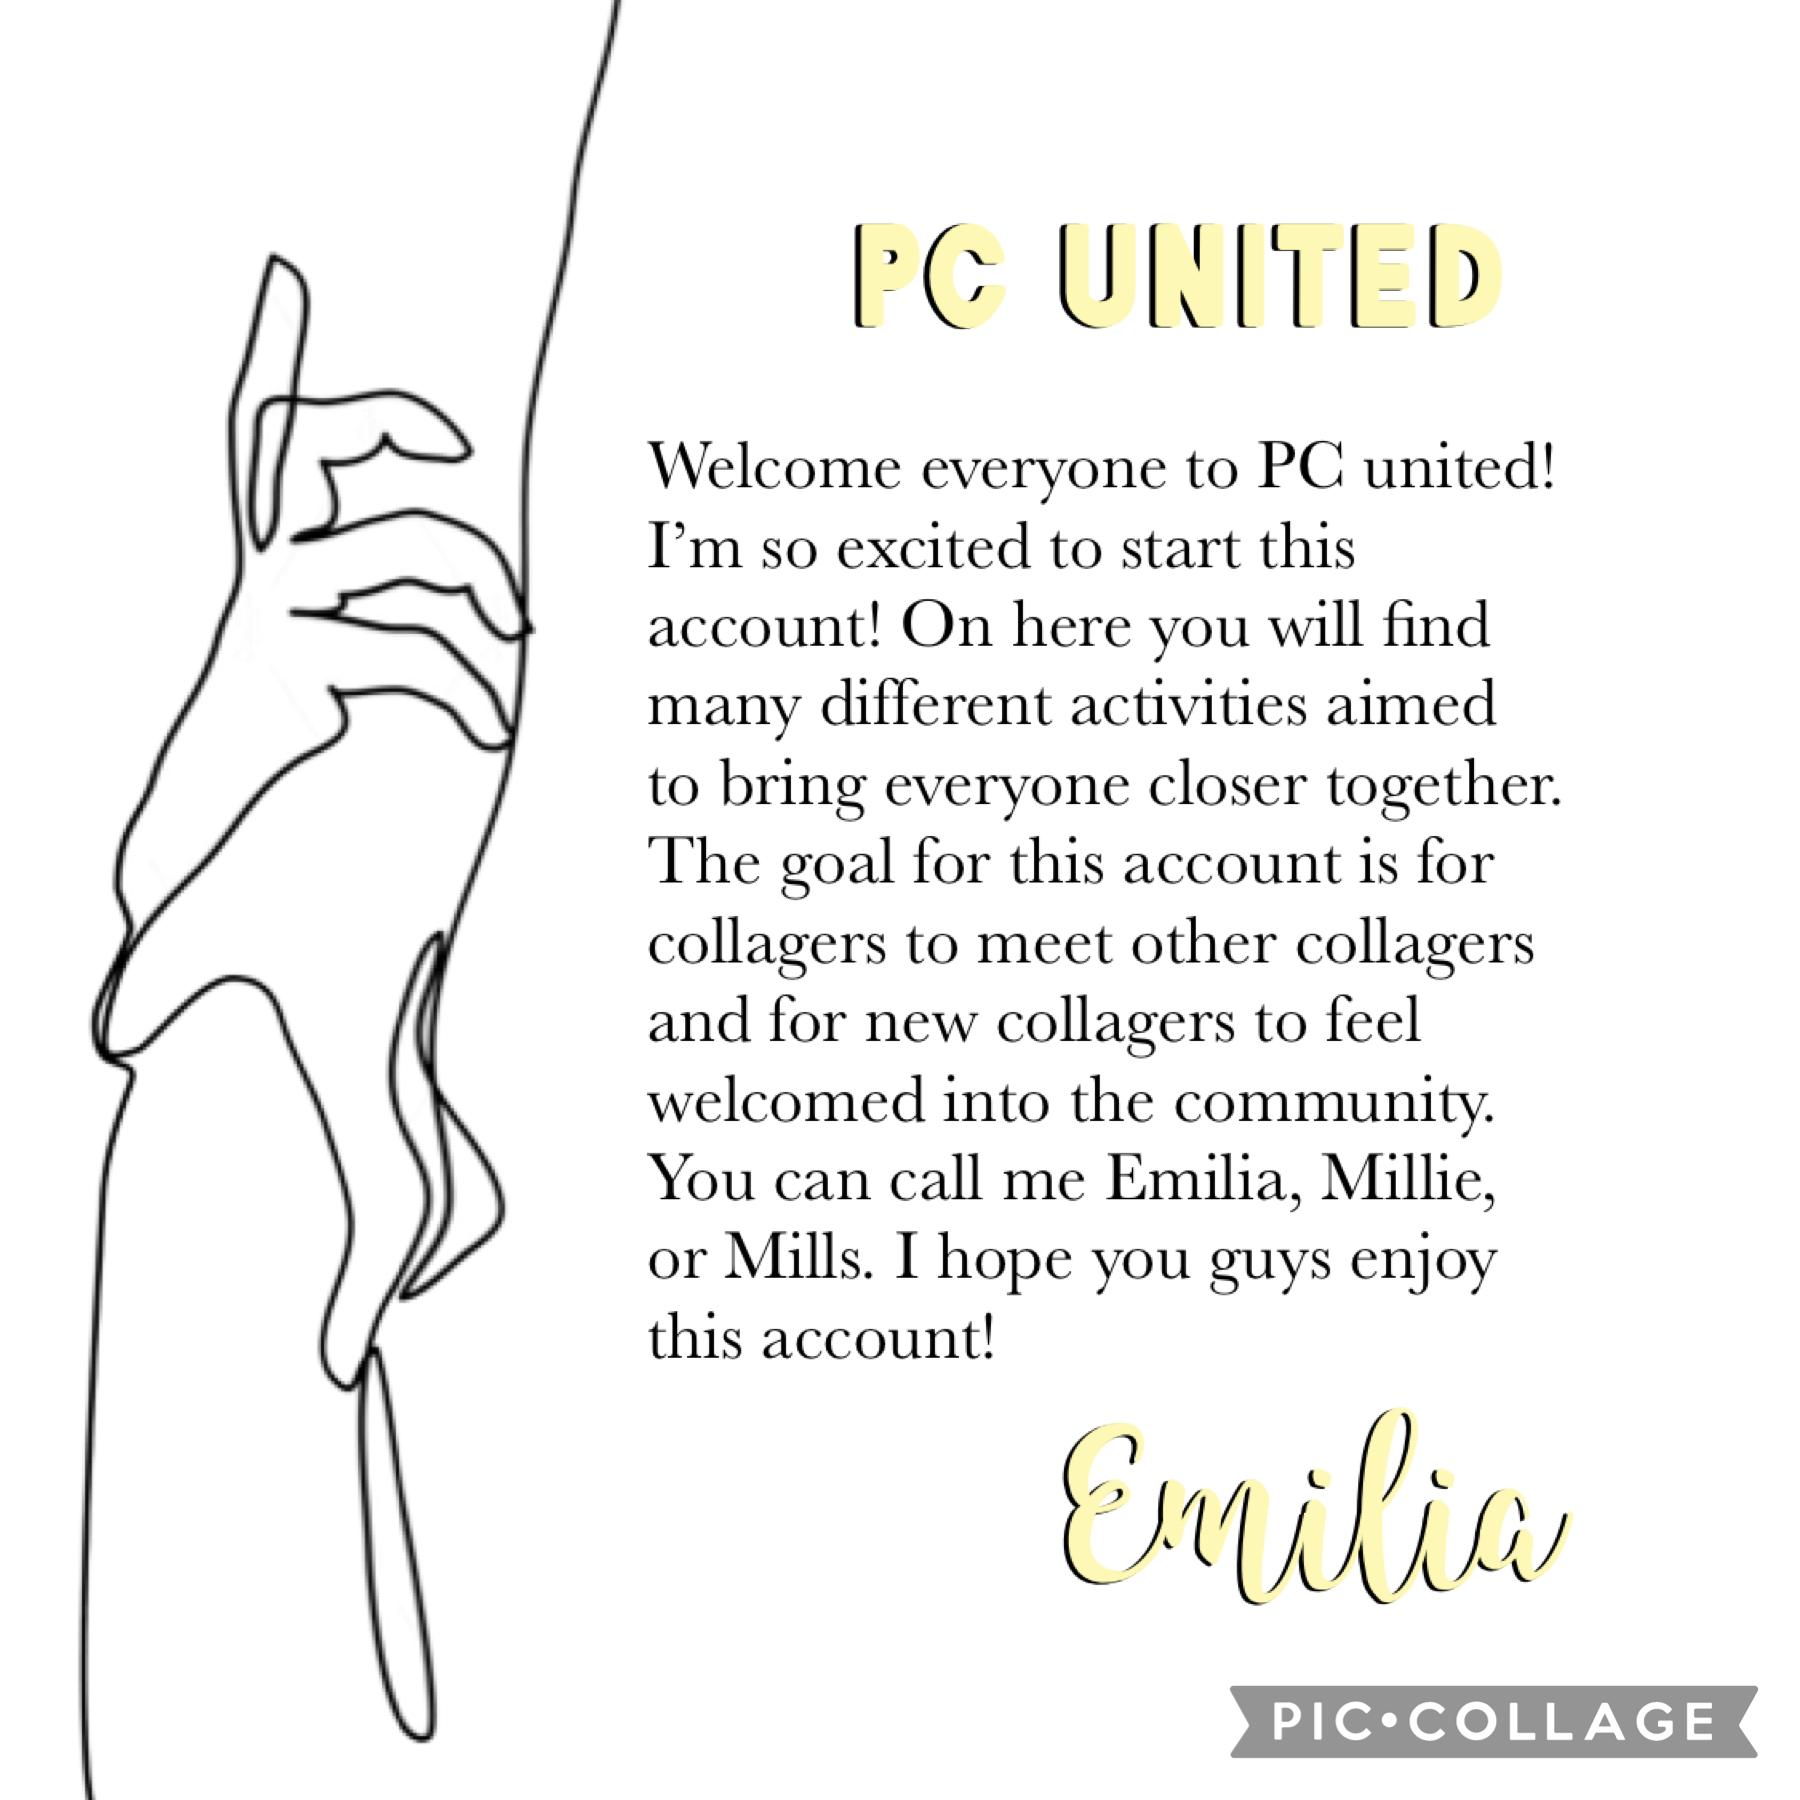 Welcome everyone! I am so excited to begin this journey!